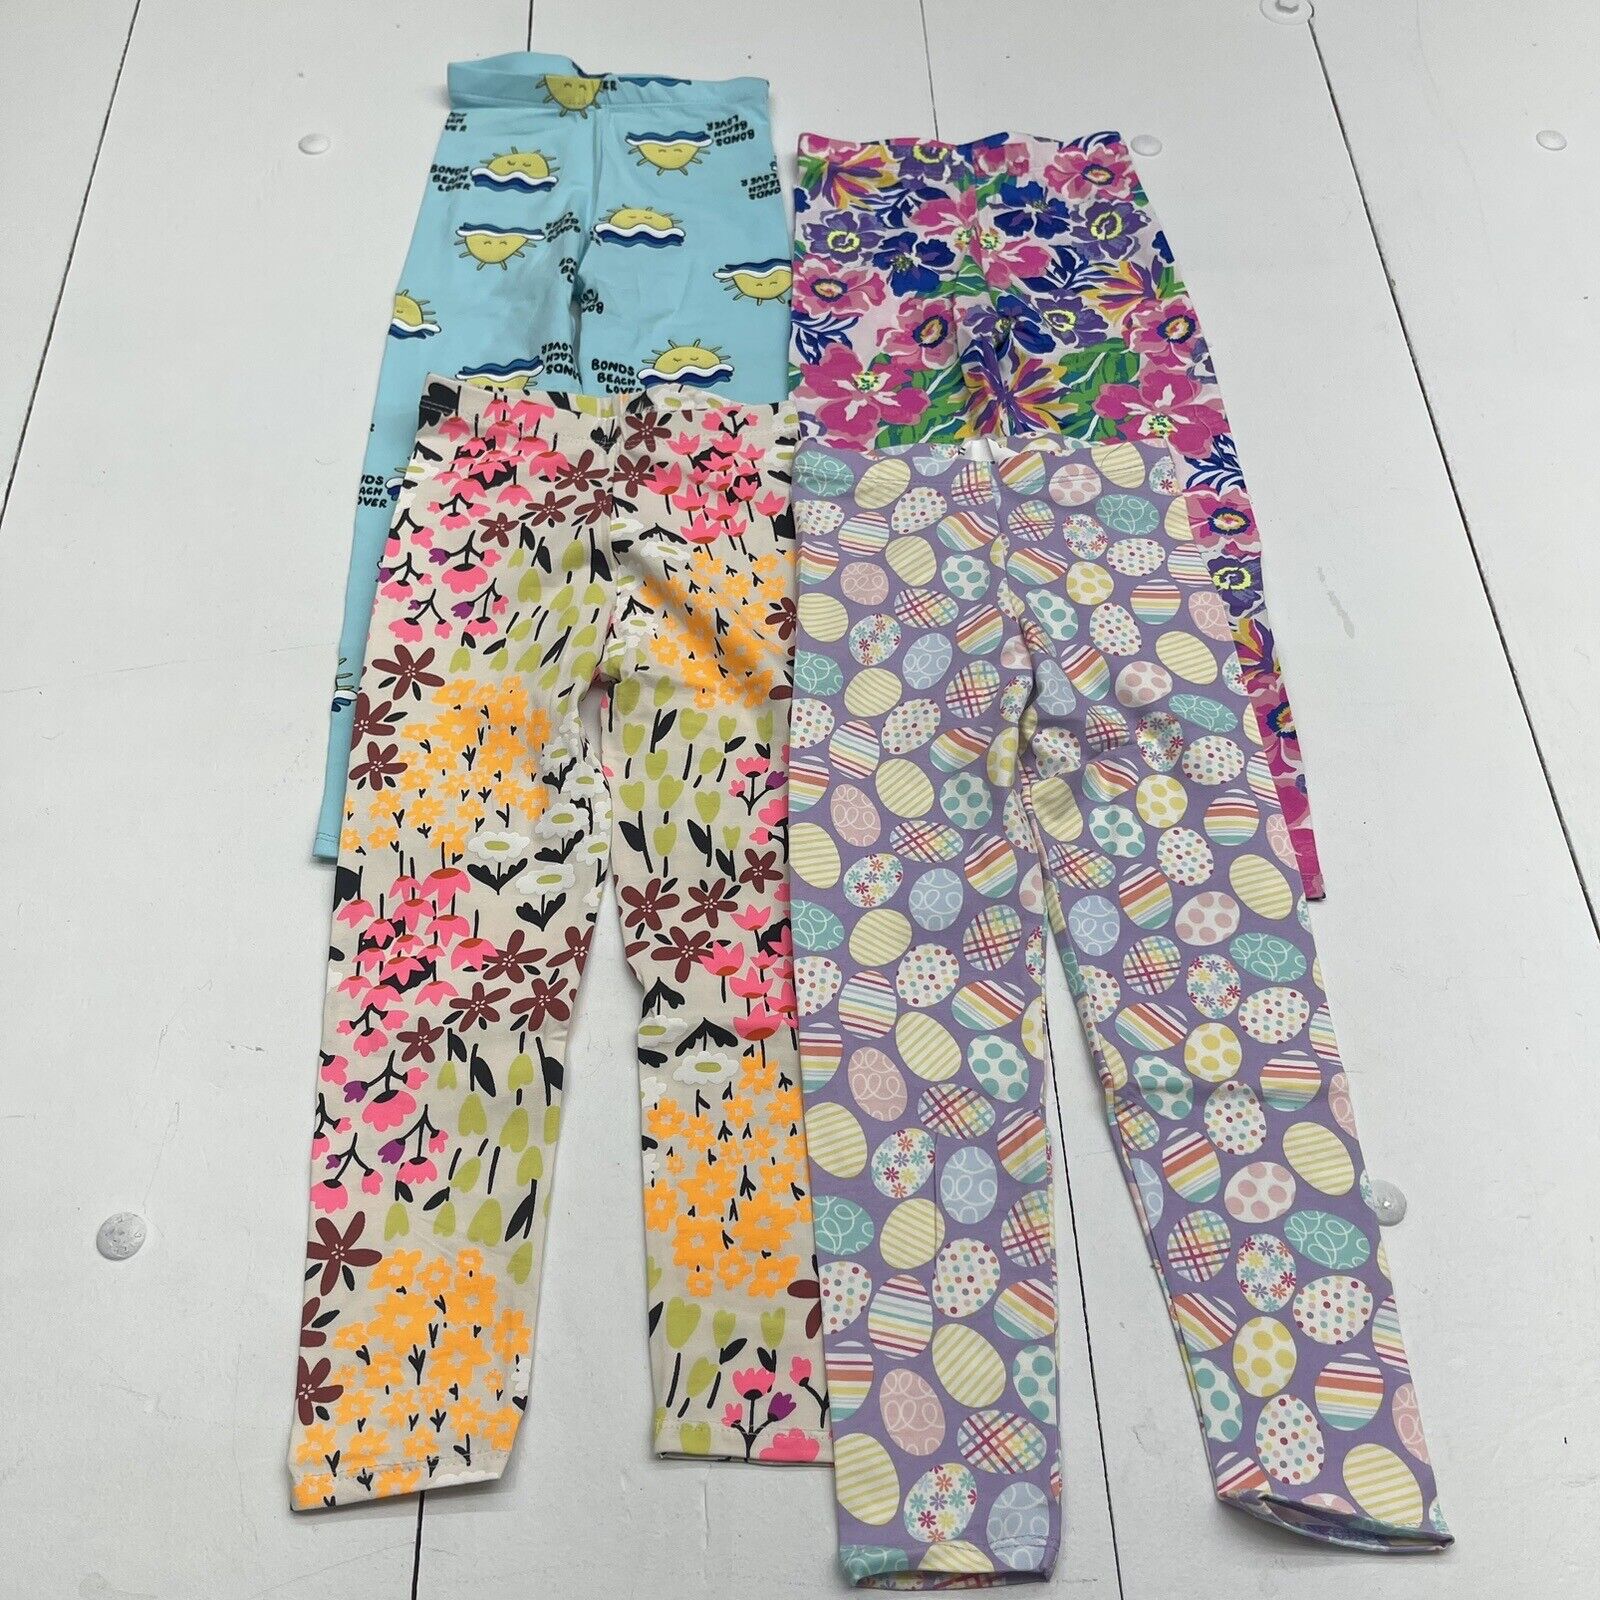 H&M Multicolored 3 Pack Printed Leggings Youth Girls Size 10-12 NWOT -  beyond exchange